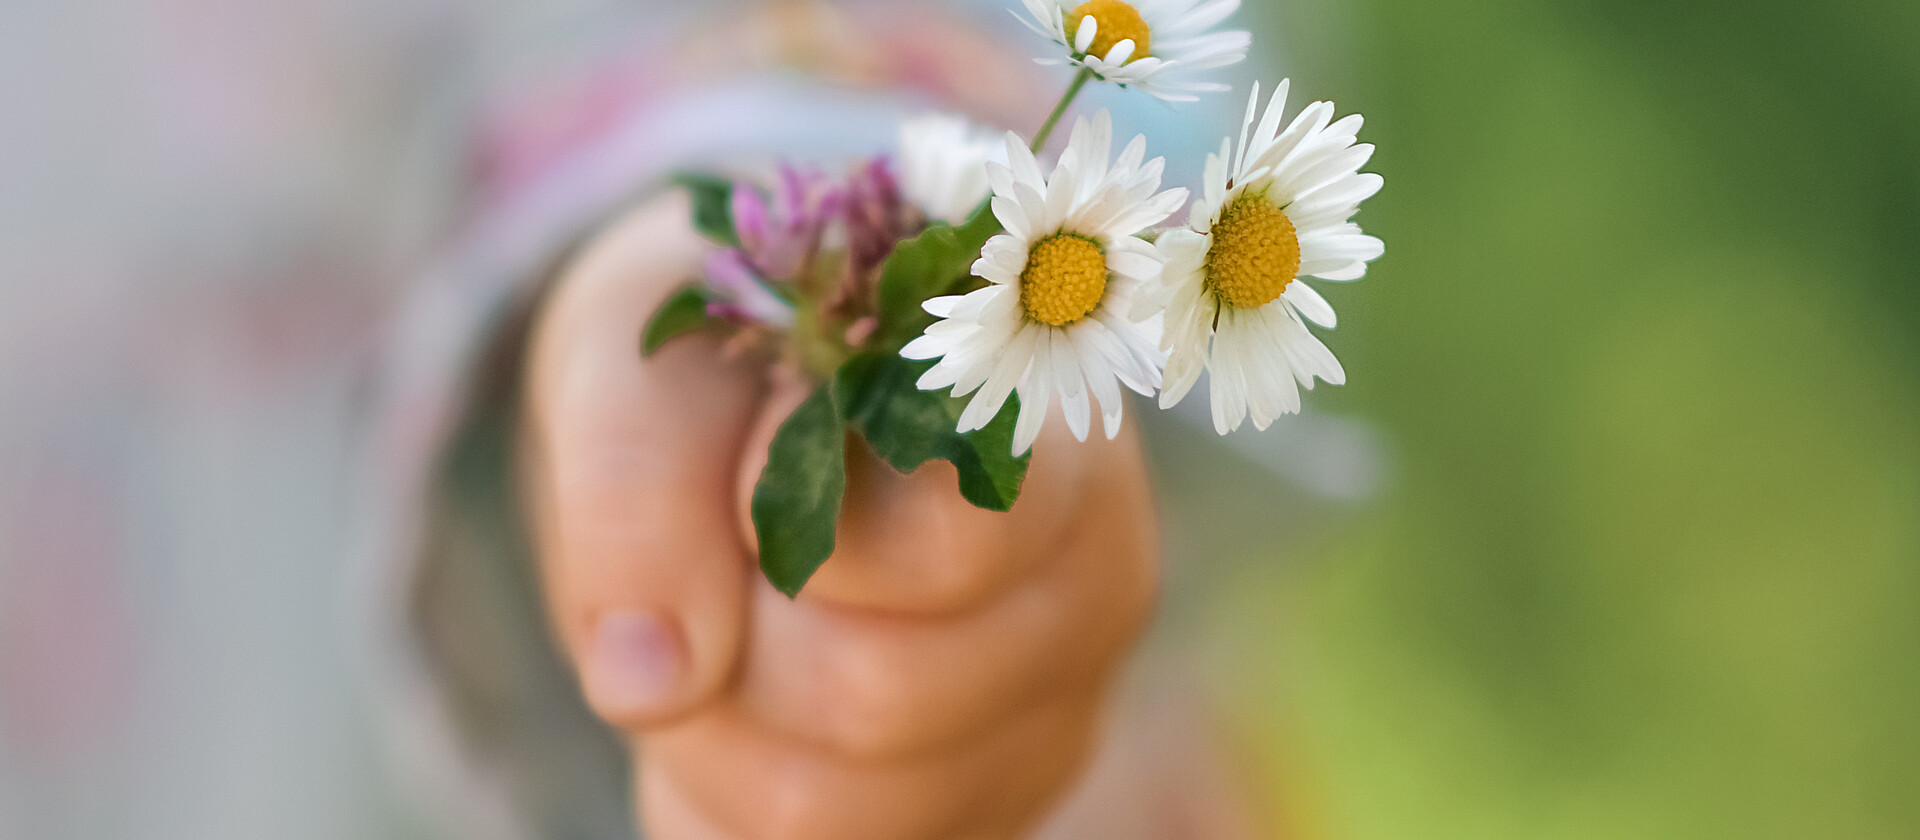 Girl holding a bouquet of daisies in her hand